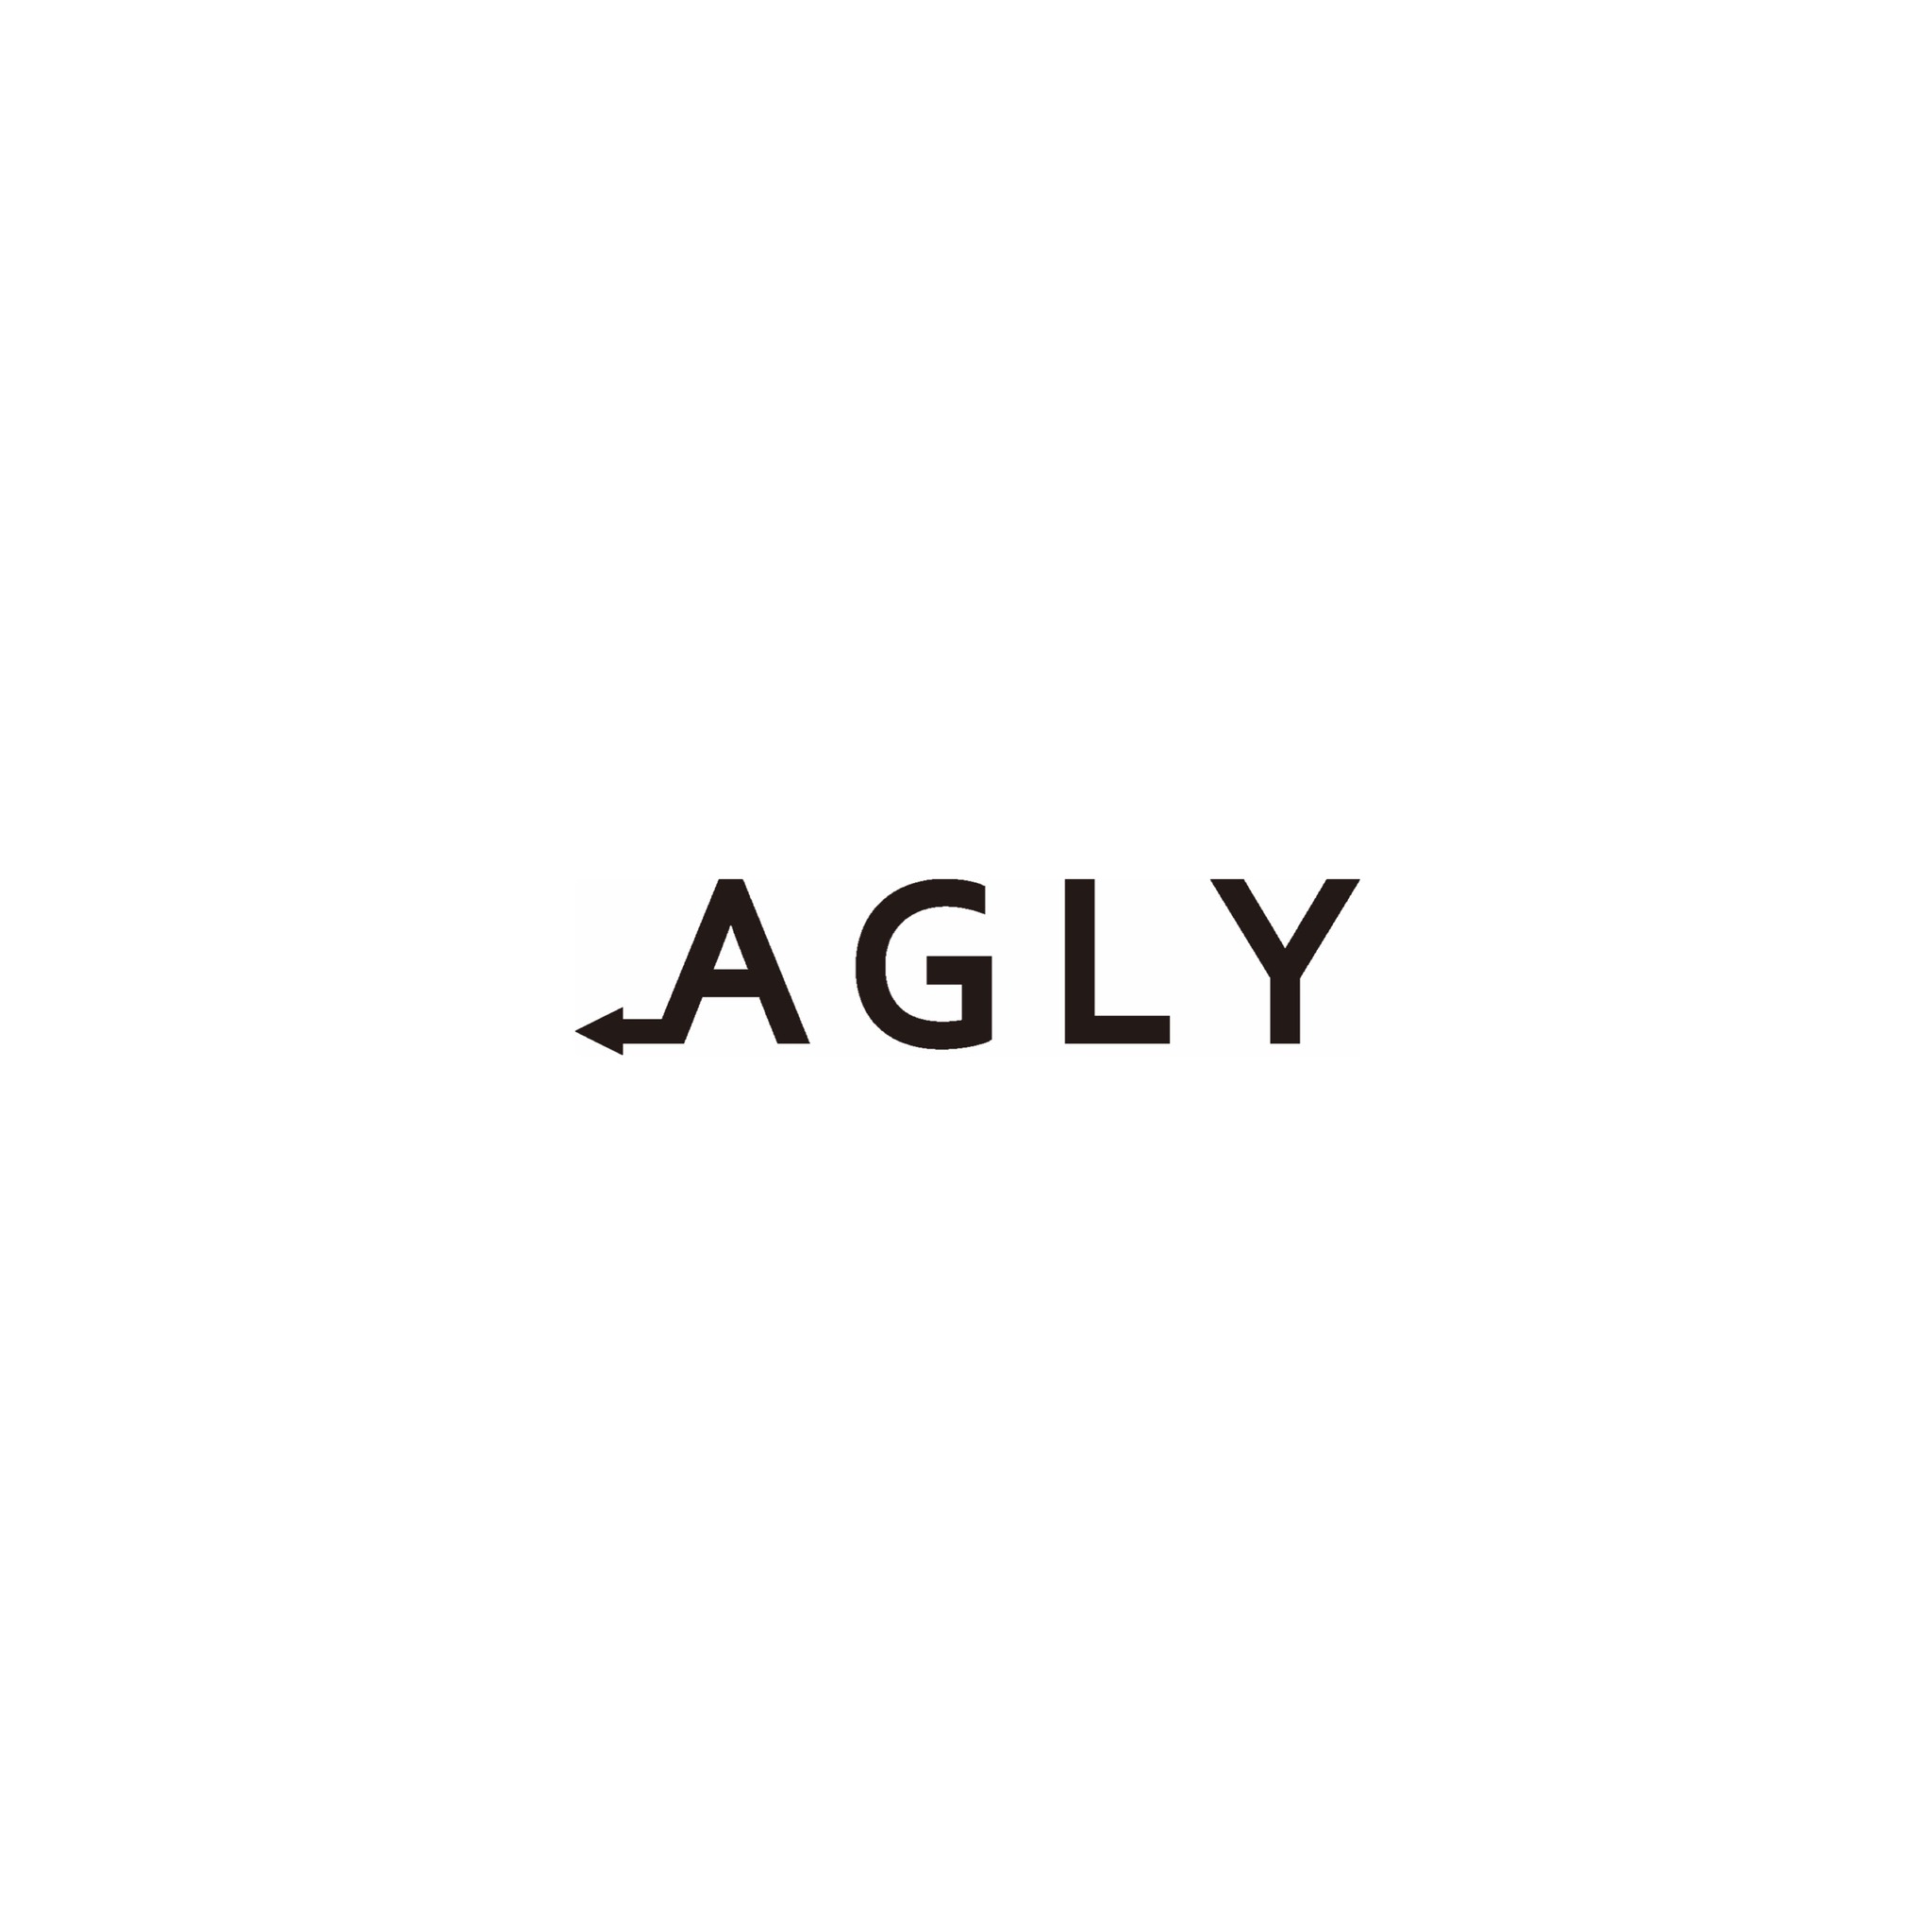 AGLY